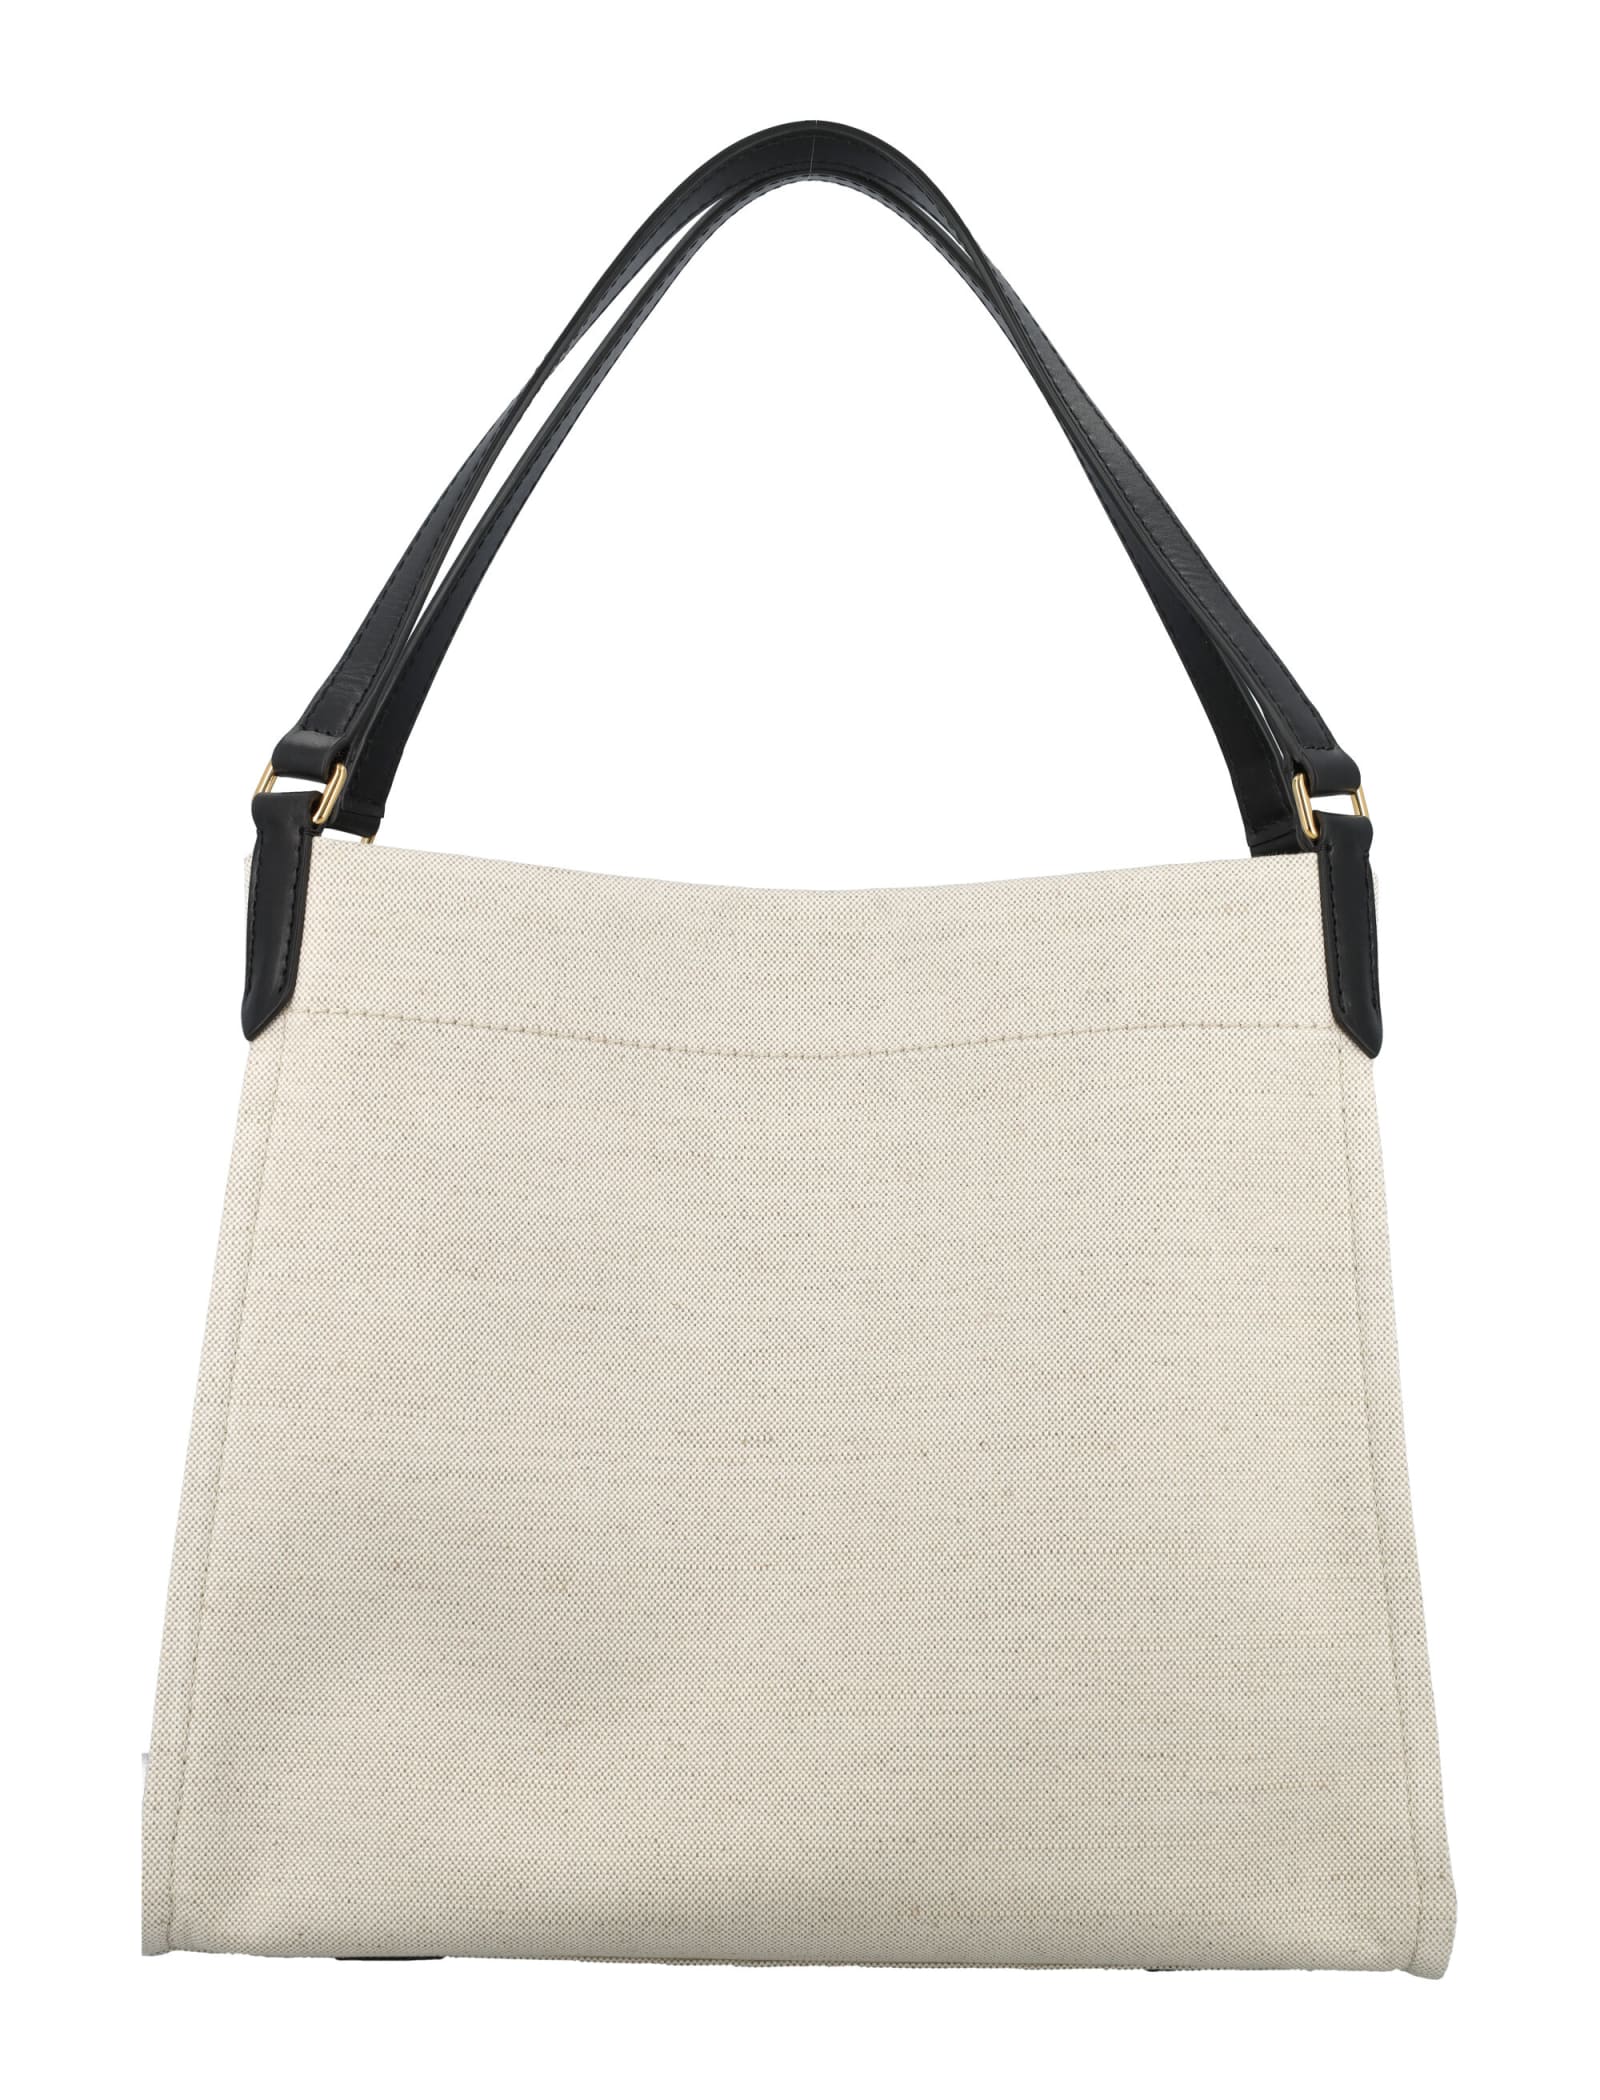 Shop Tom Ford Amalfi Large Tote In White